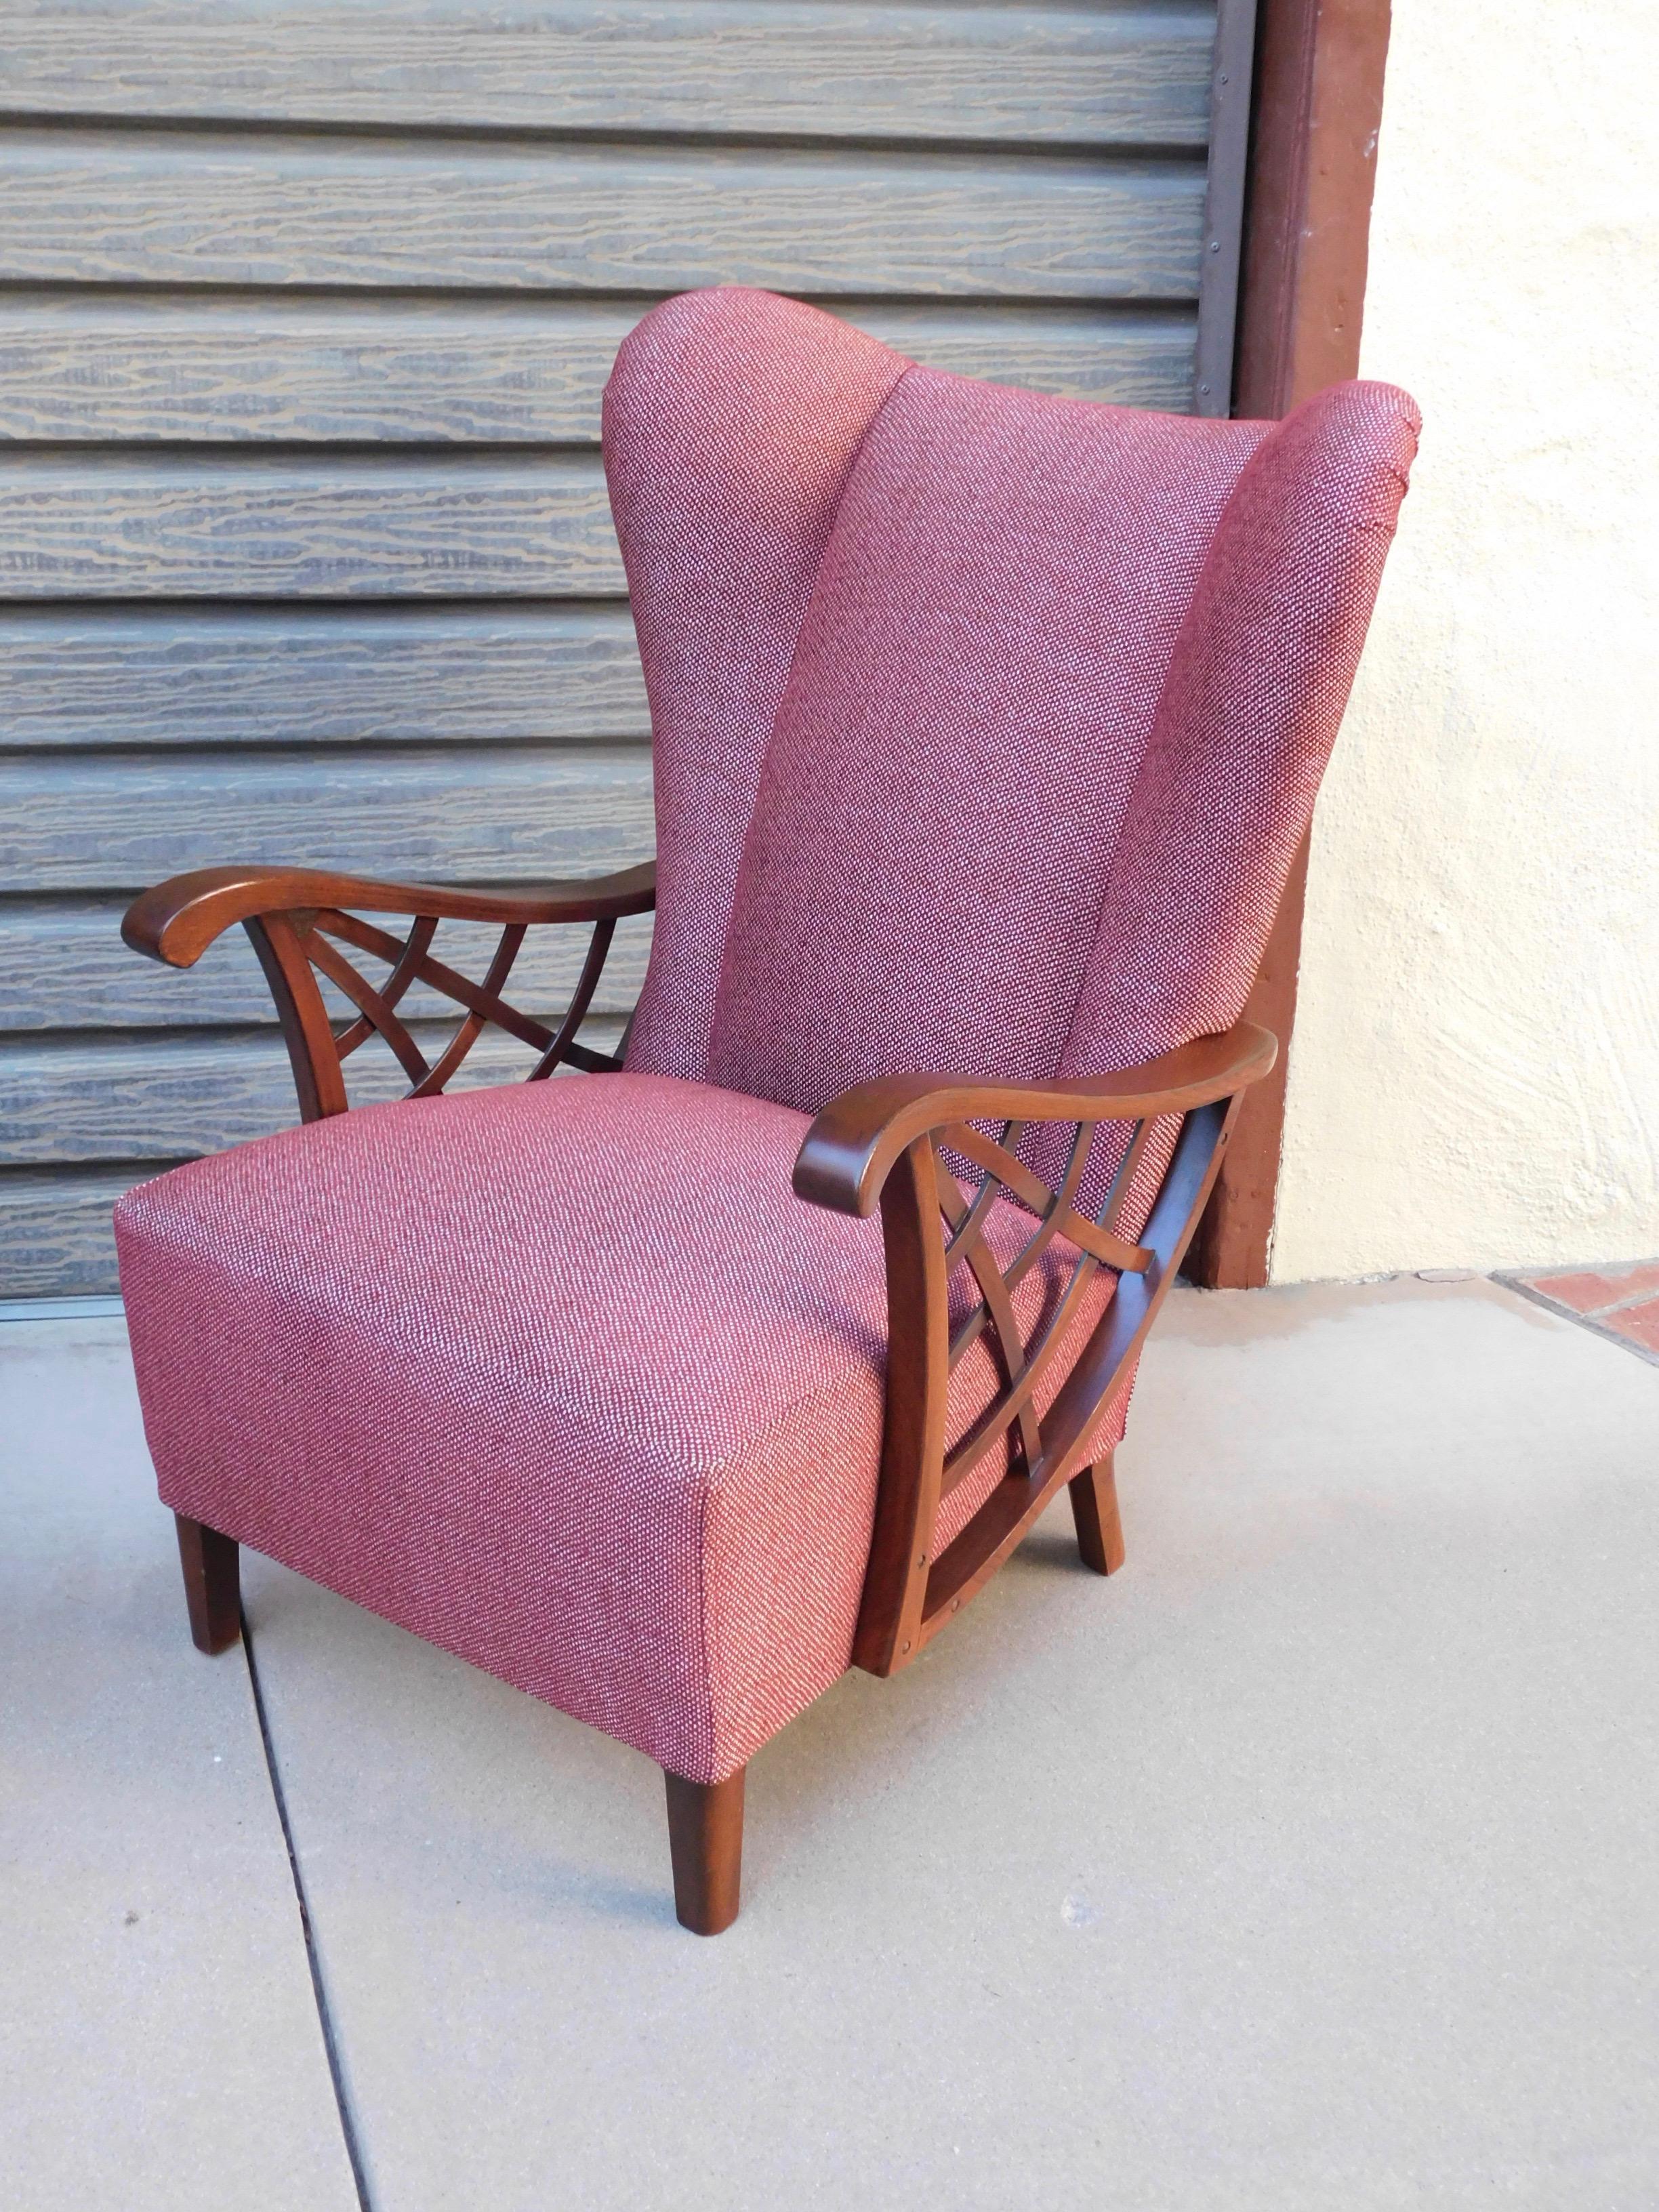 Birch Pair of Swedish Modernist Winged Back Spider Web Armchairs, circa 1940 For Sale